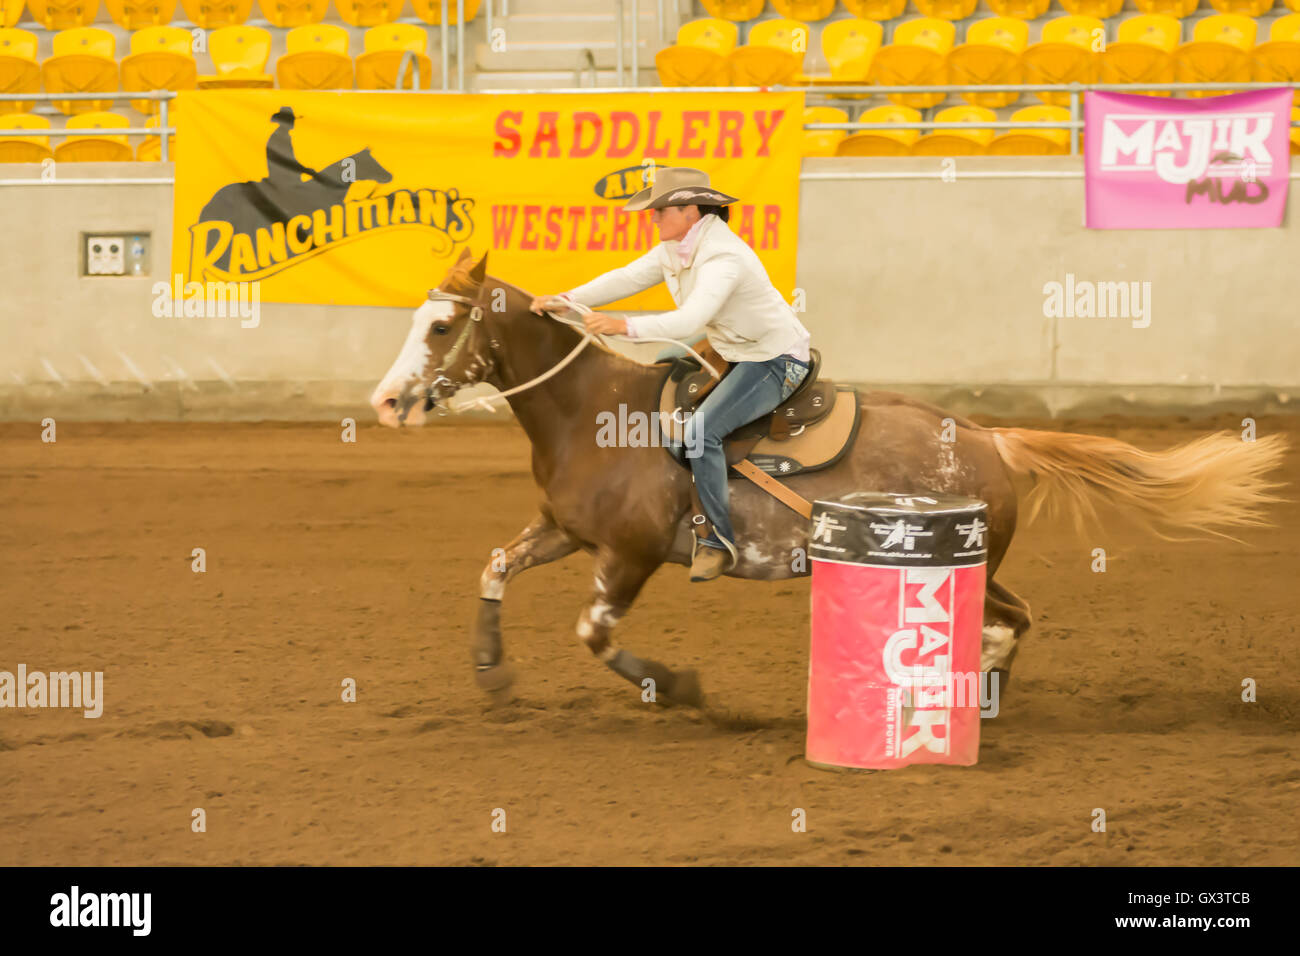 10 Ways to Make Your Barrel Racing Events Guide Easier